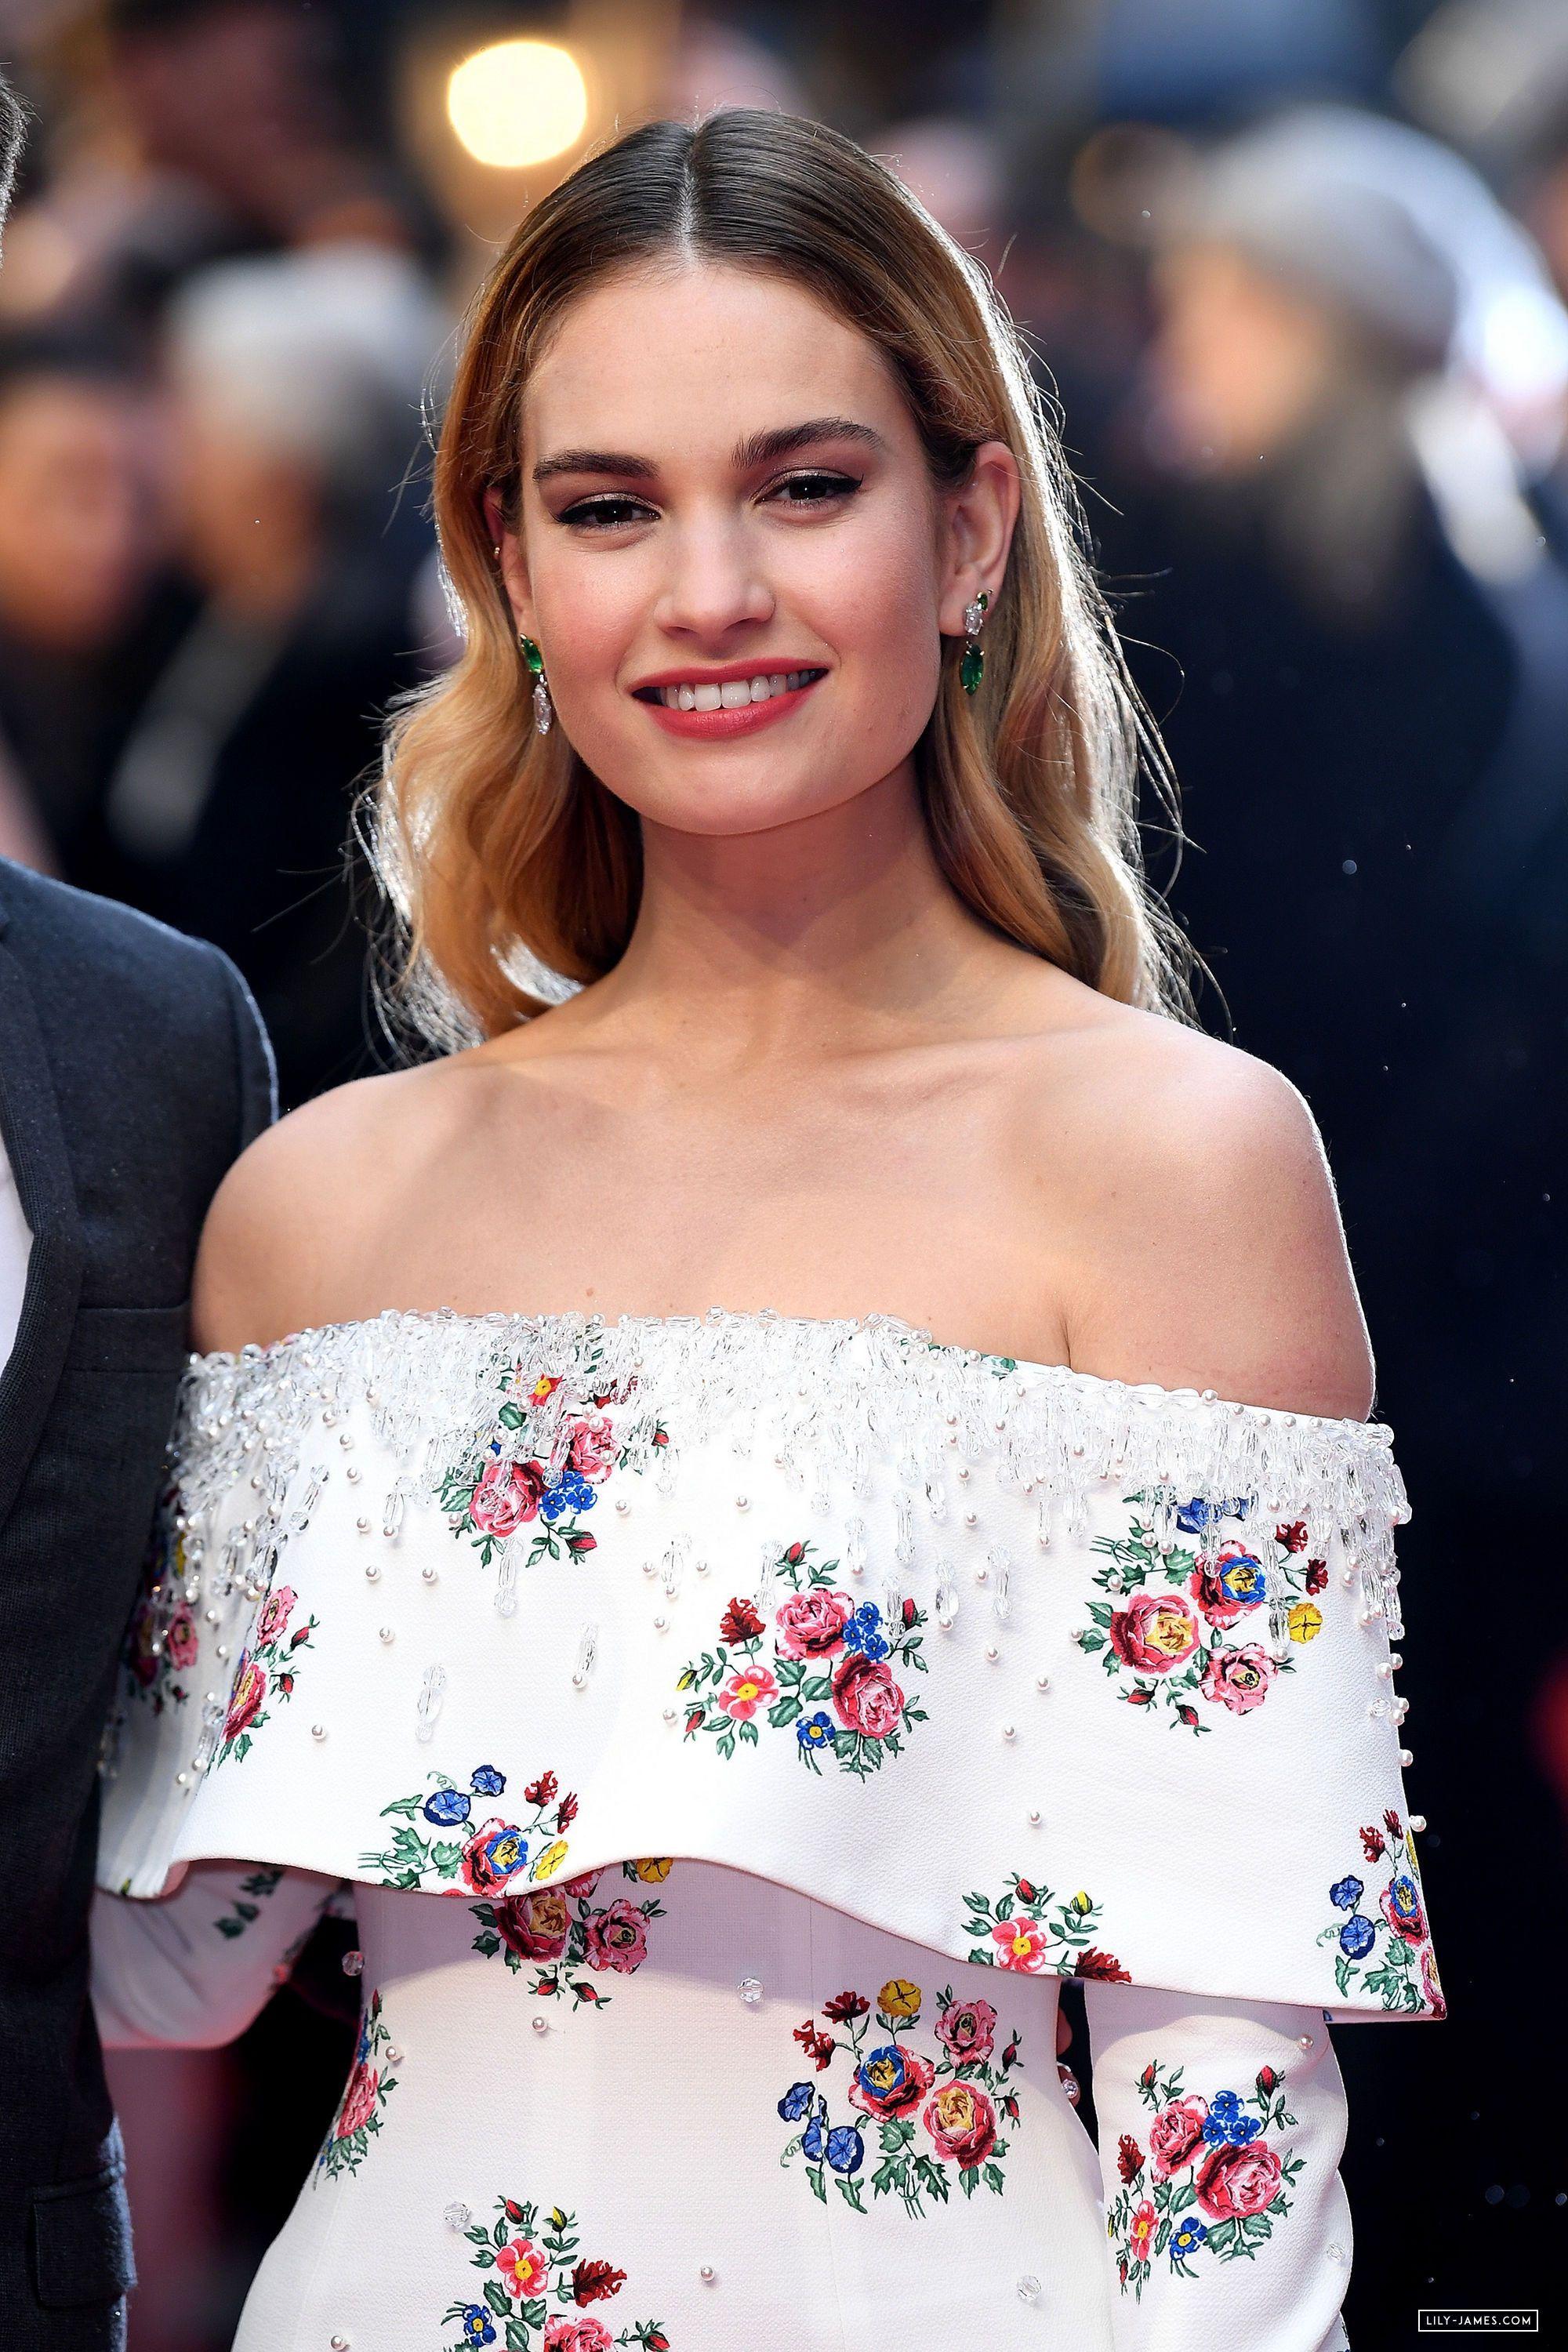 Lily James In The Guernsey Literary And Potato Peel Pie Society Wallpapers